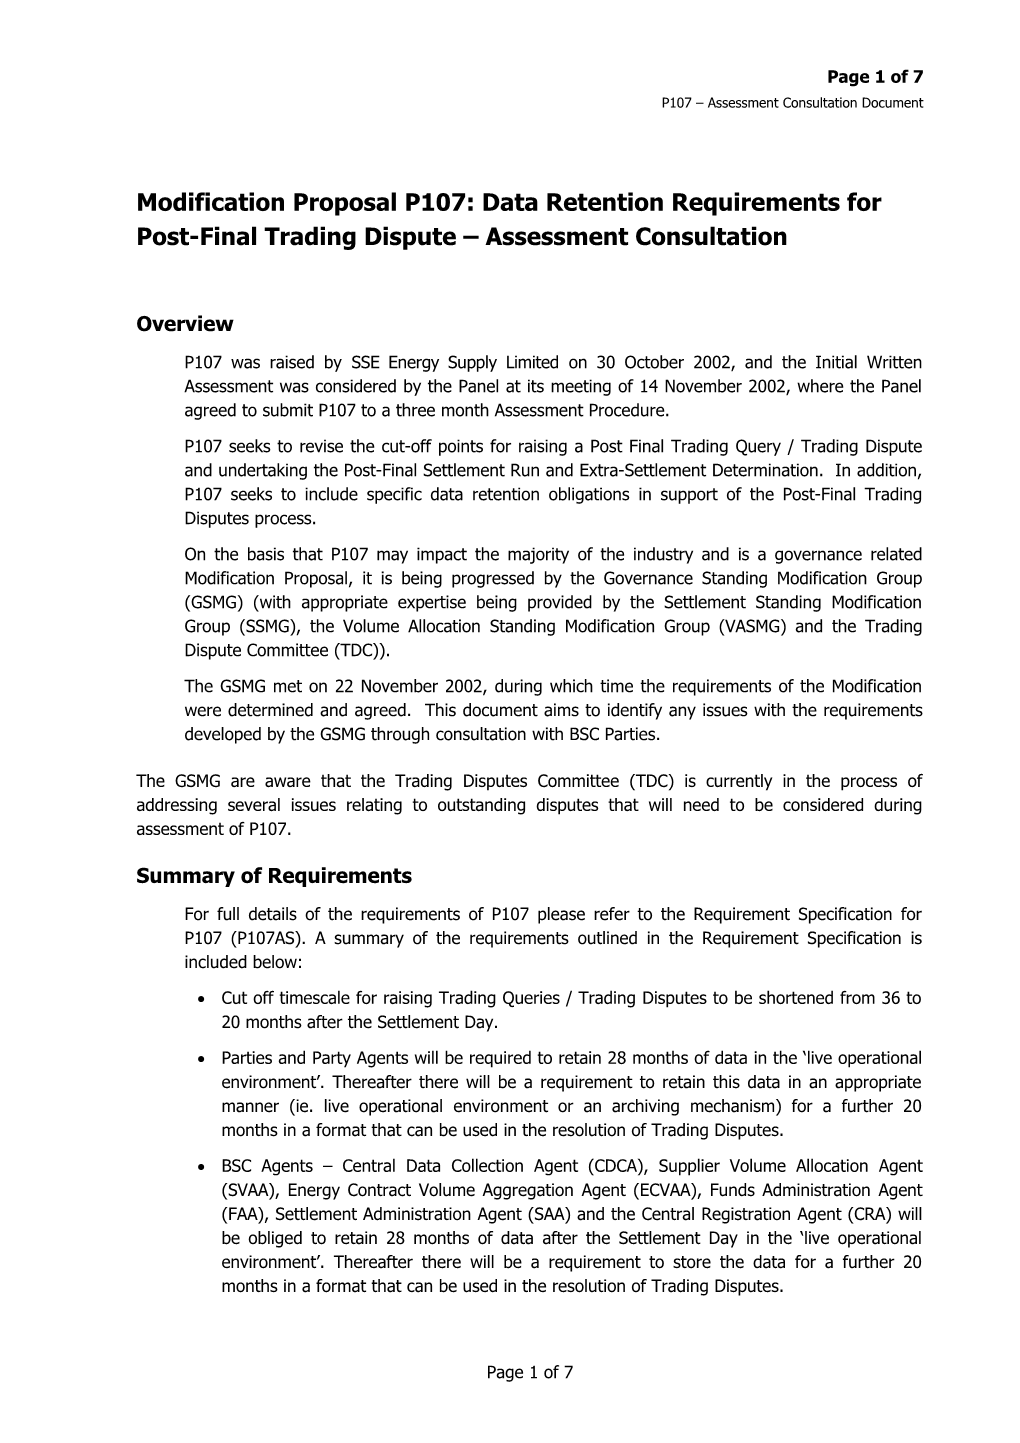 Modification Proposal P107: Data Retention Requirements for Post-Final Trading Dispute